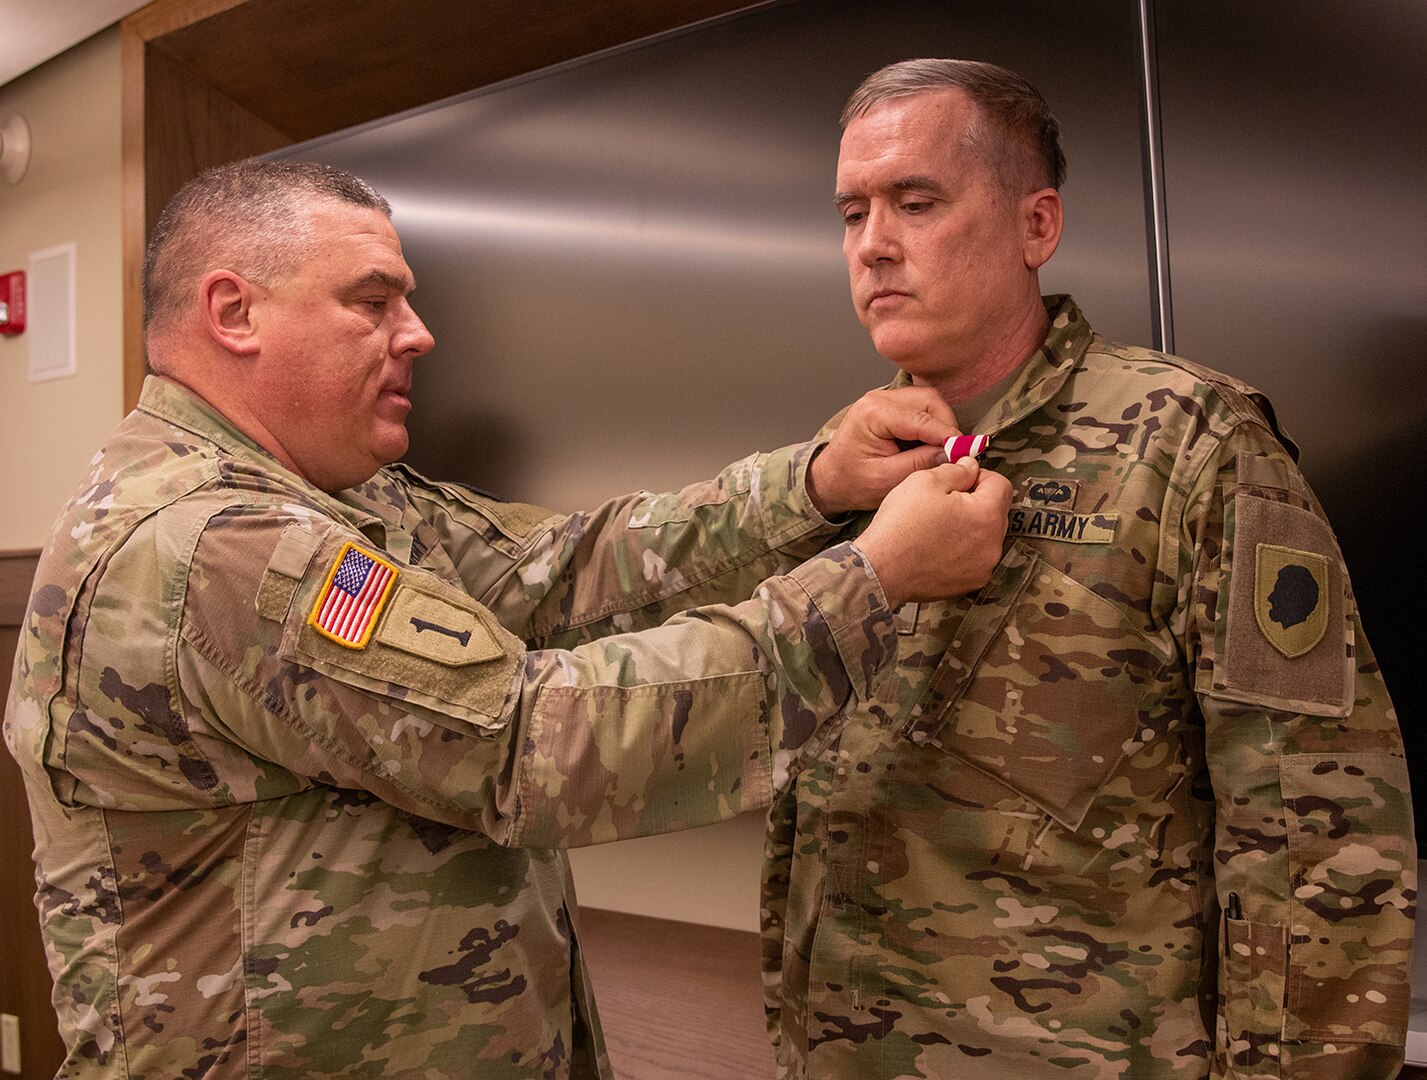 Illinois Army National Guard Lt. Col. Brian Maloney, of Champaign, Illinois, Comptroller, United States Property and Fiscal Office (USPFO), receives the Meritorious Service Medal, from Col. Brian Creech, the USPFO of Illinois, during a retirement ceremony at Camp Lincoln, Springfield, Illinois, May 5.